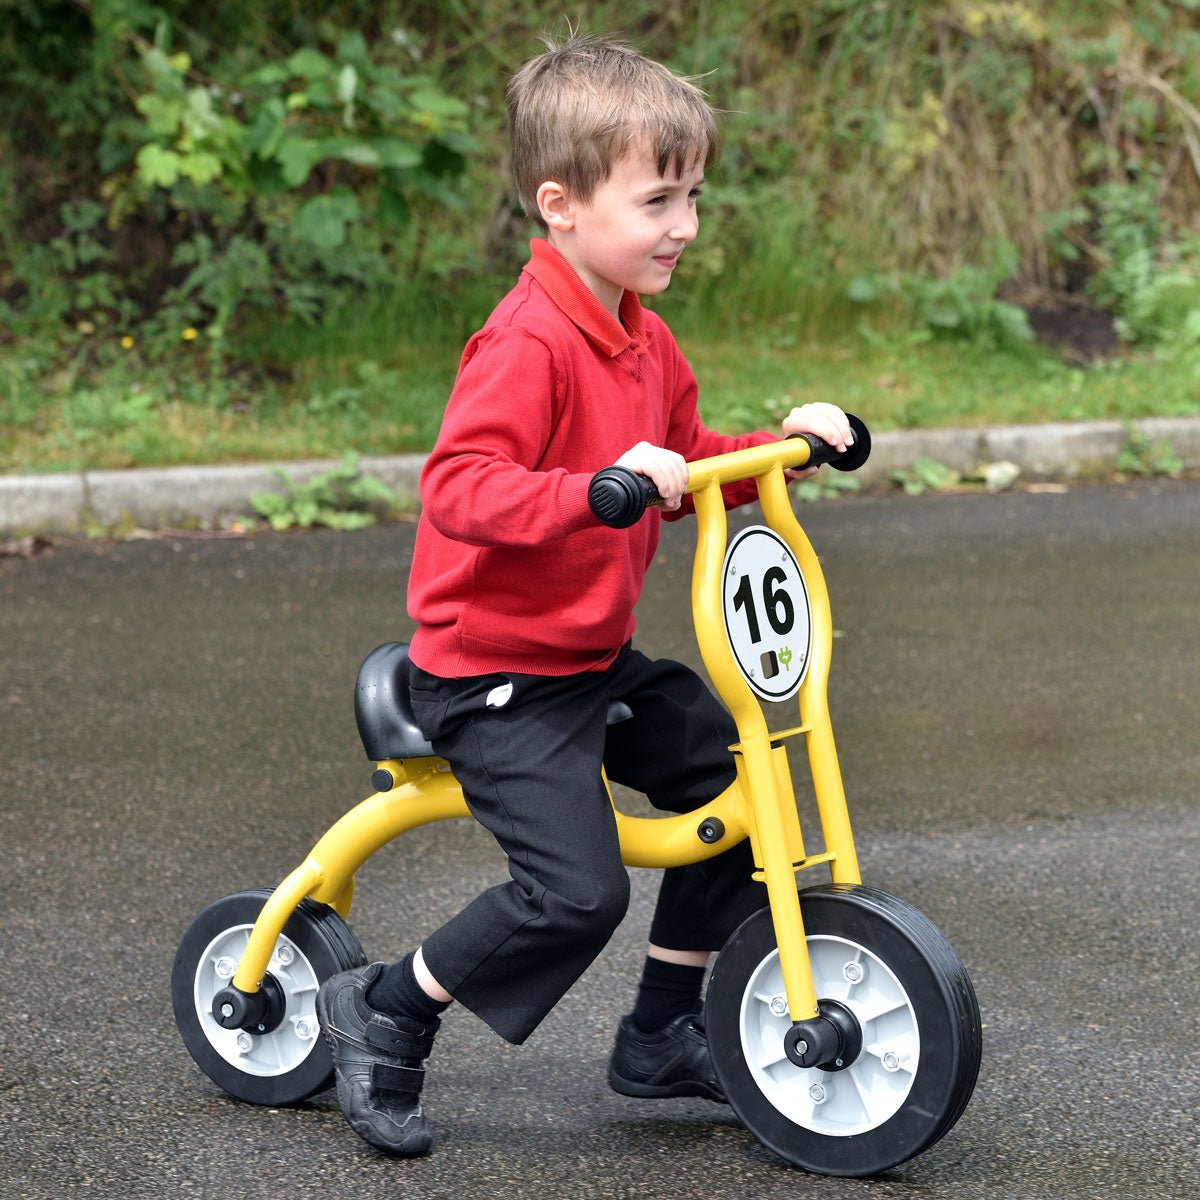 Balance Bike | Learning and Exploring Through Play